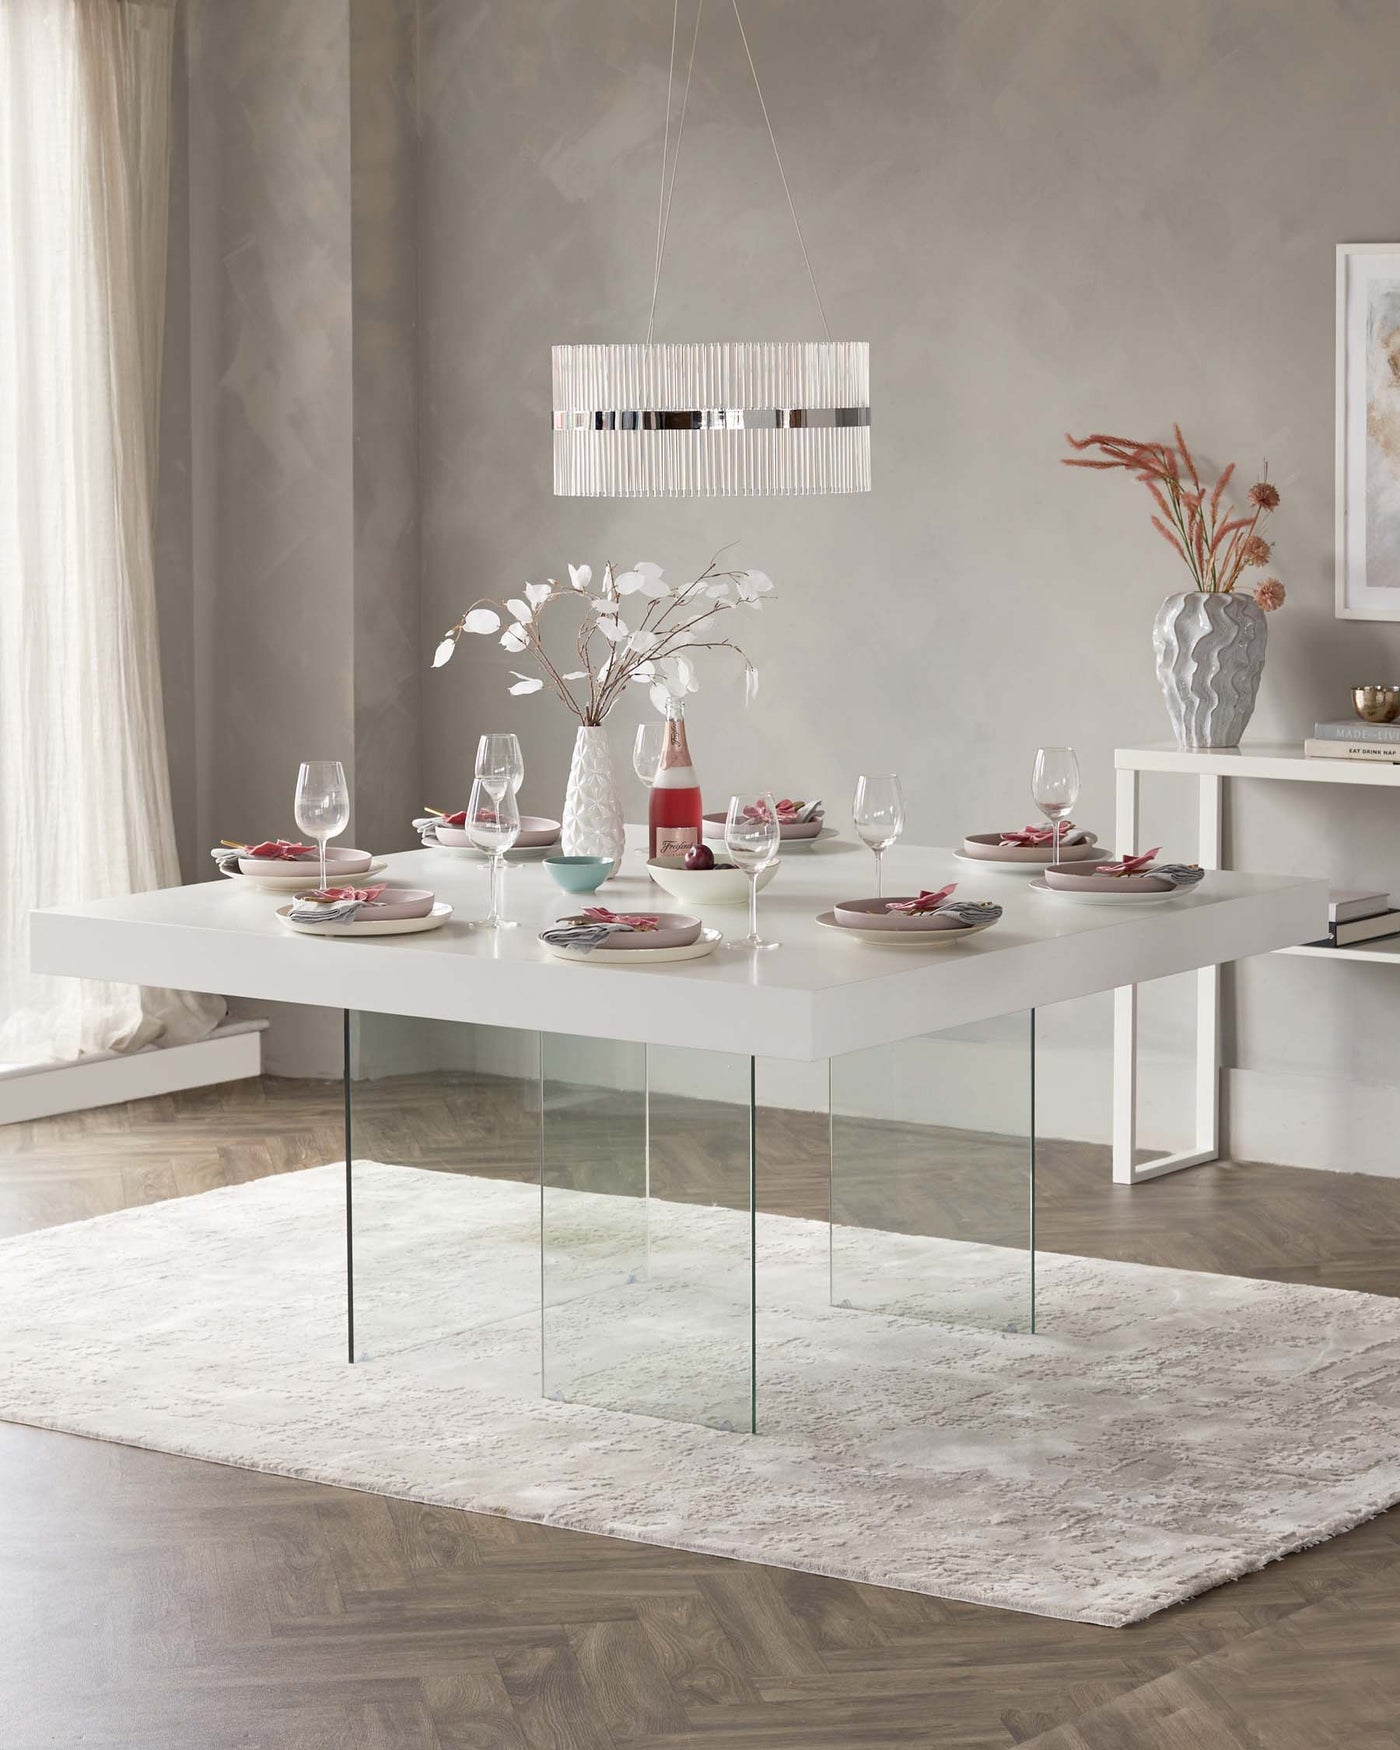 A modern rectangular dining table with a white top supported by four clear glass legs, positioned on a textured white area rug. The table is set with plates, glasses, and cutlery for a meal, and complemented by decorative vases with flowers.